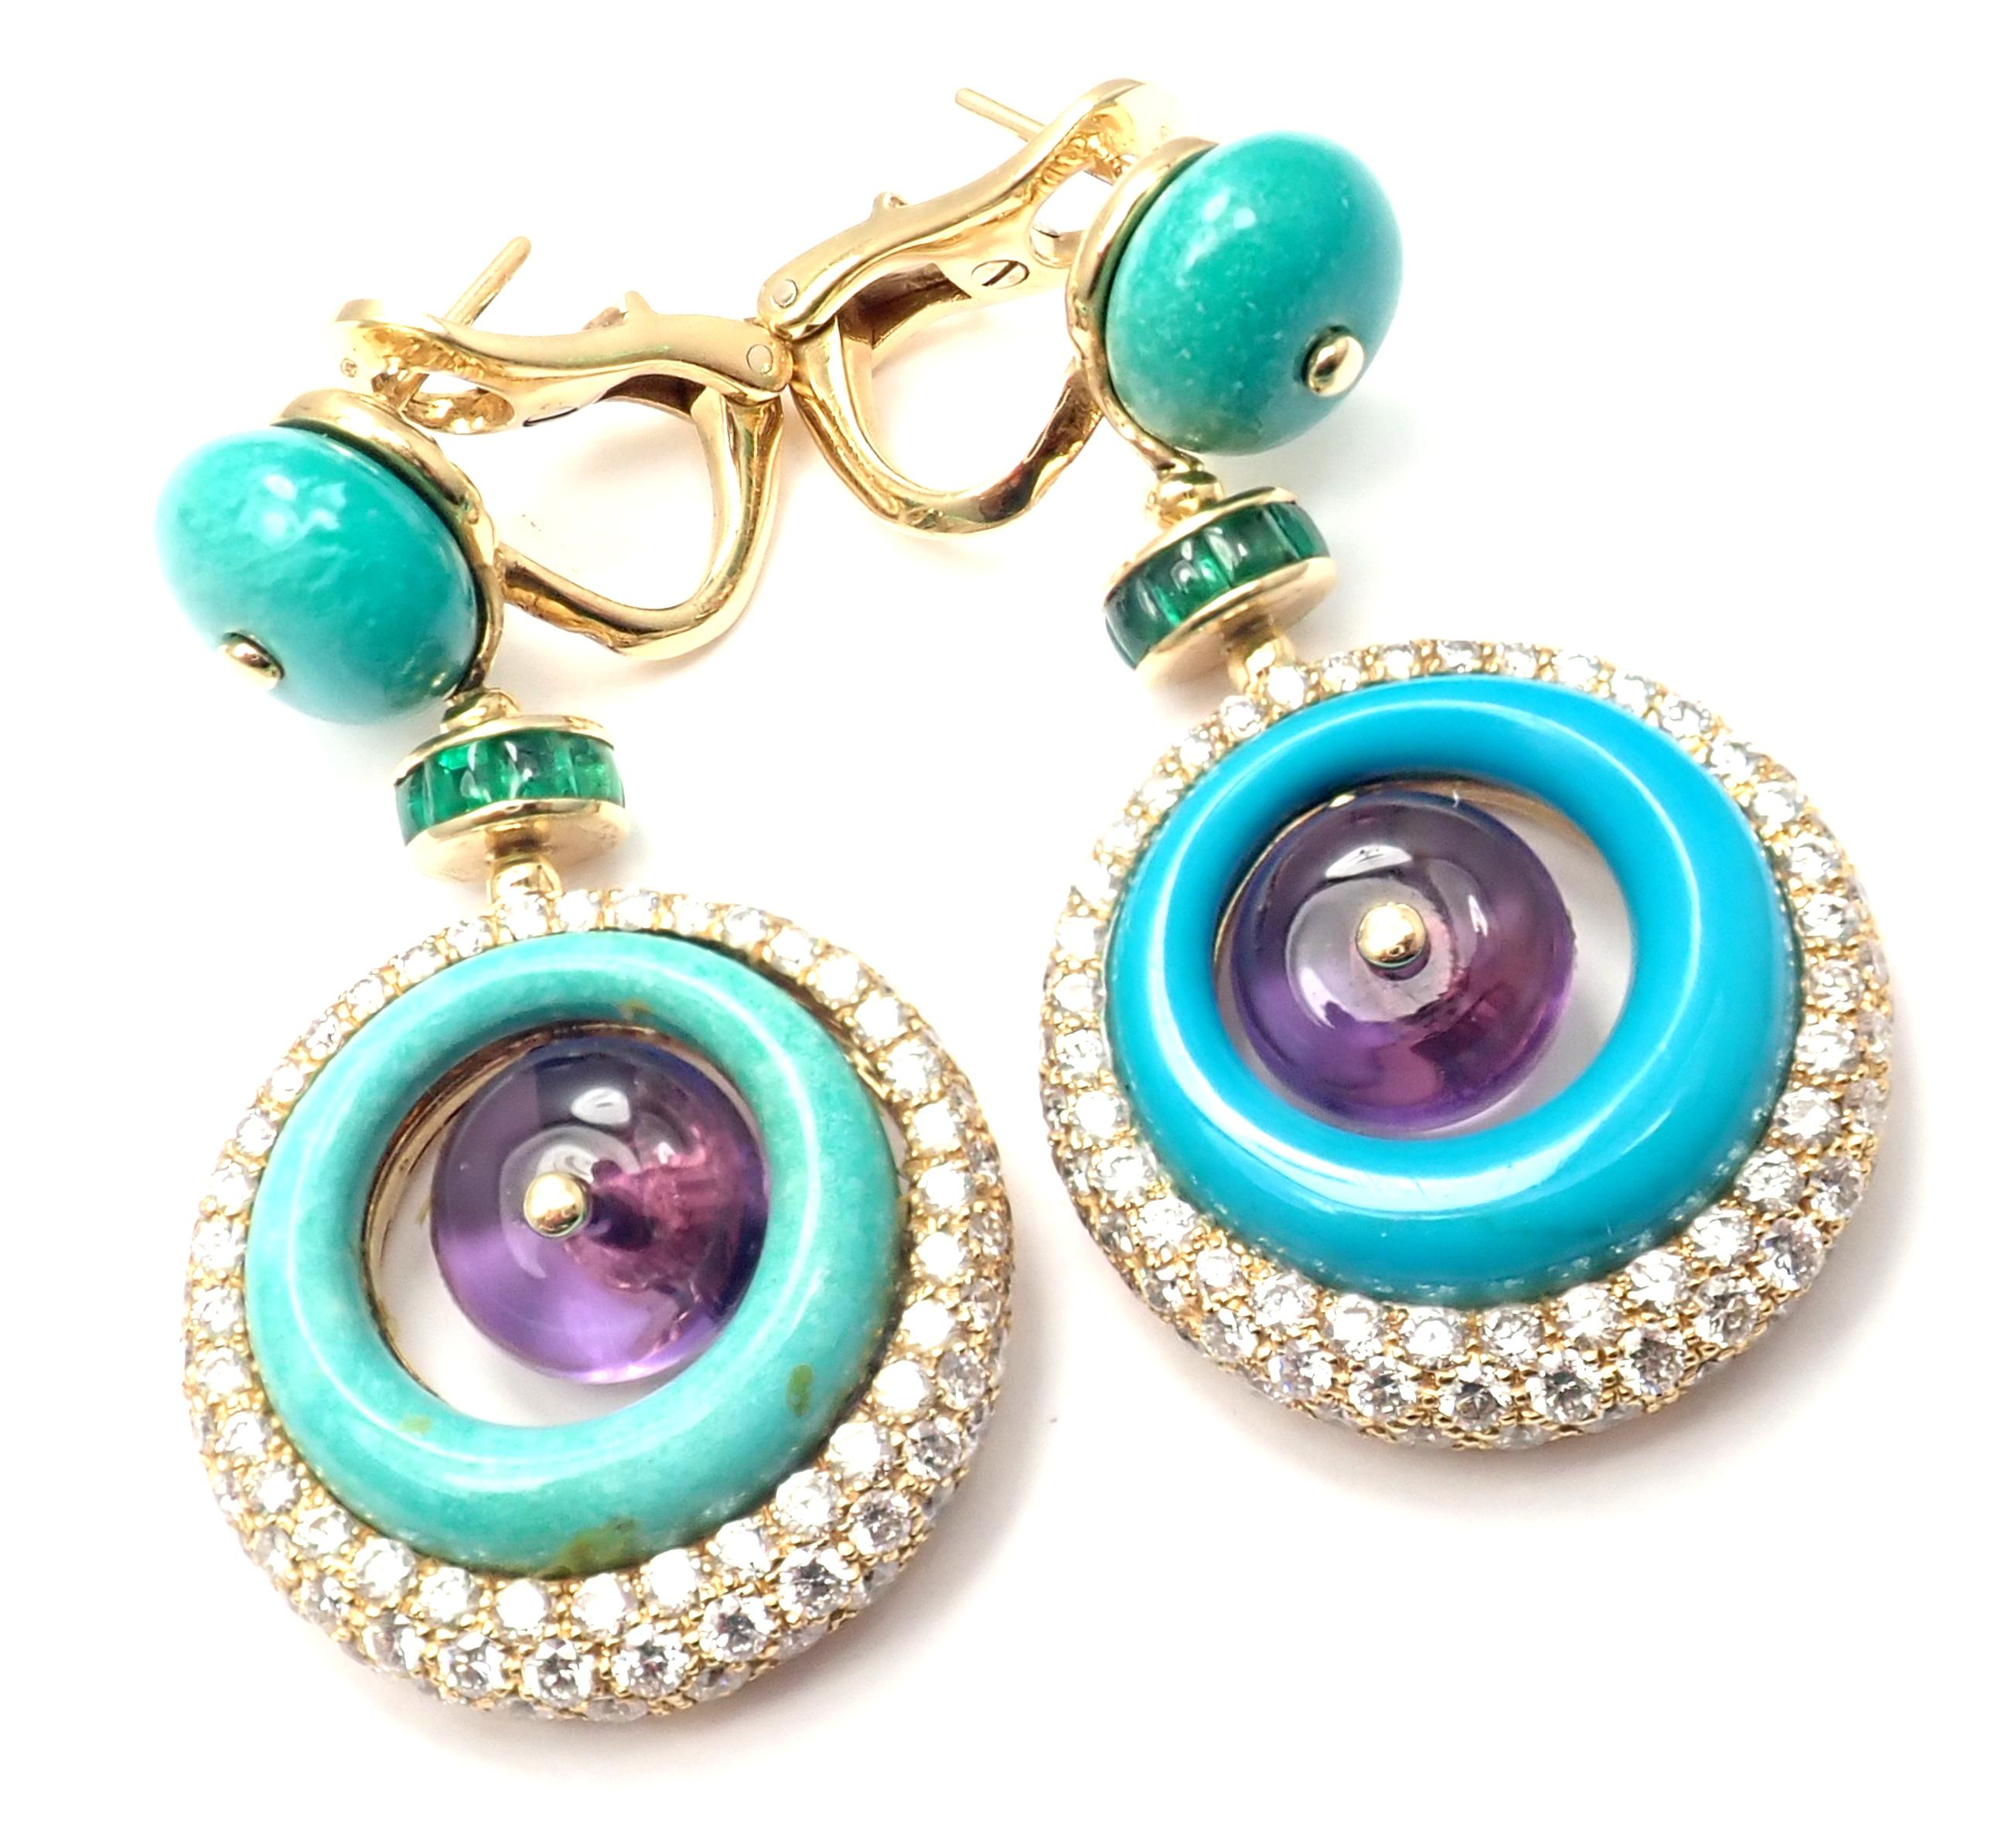 18k yellow gold diamond, turquoise, amethyst, green tourmaline drop earrings by Bulgari.
With 136 round brilliant cut diamonds VS1 clarity G color total weight approx. 3ct
Turquoise stones
2 Amethyst stones
Green tourmalines
Detail:
Measurements: 